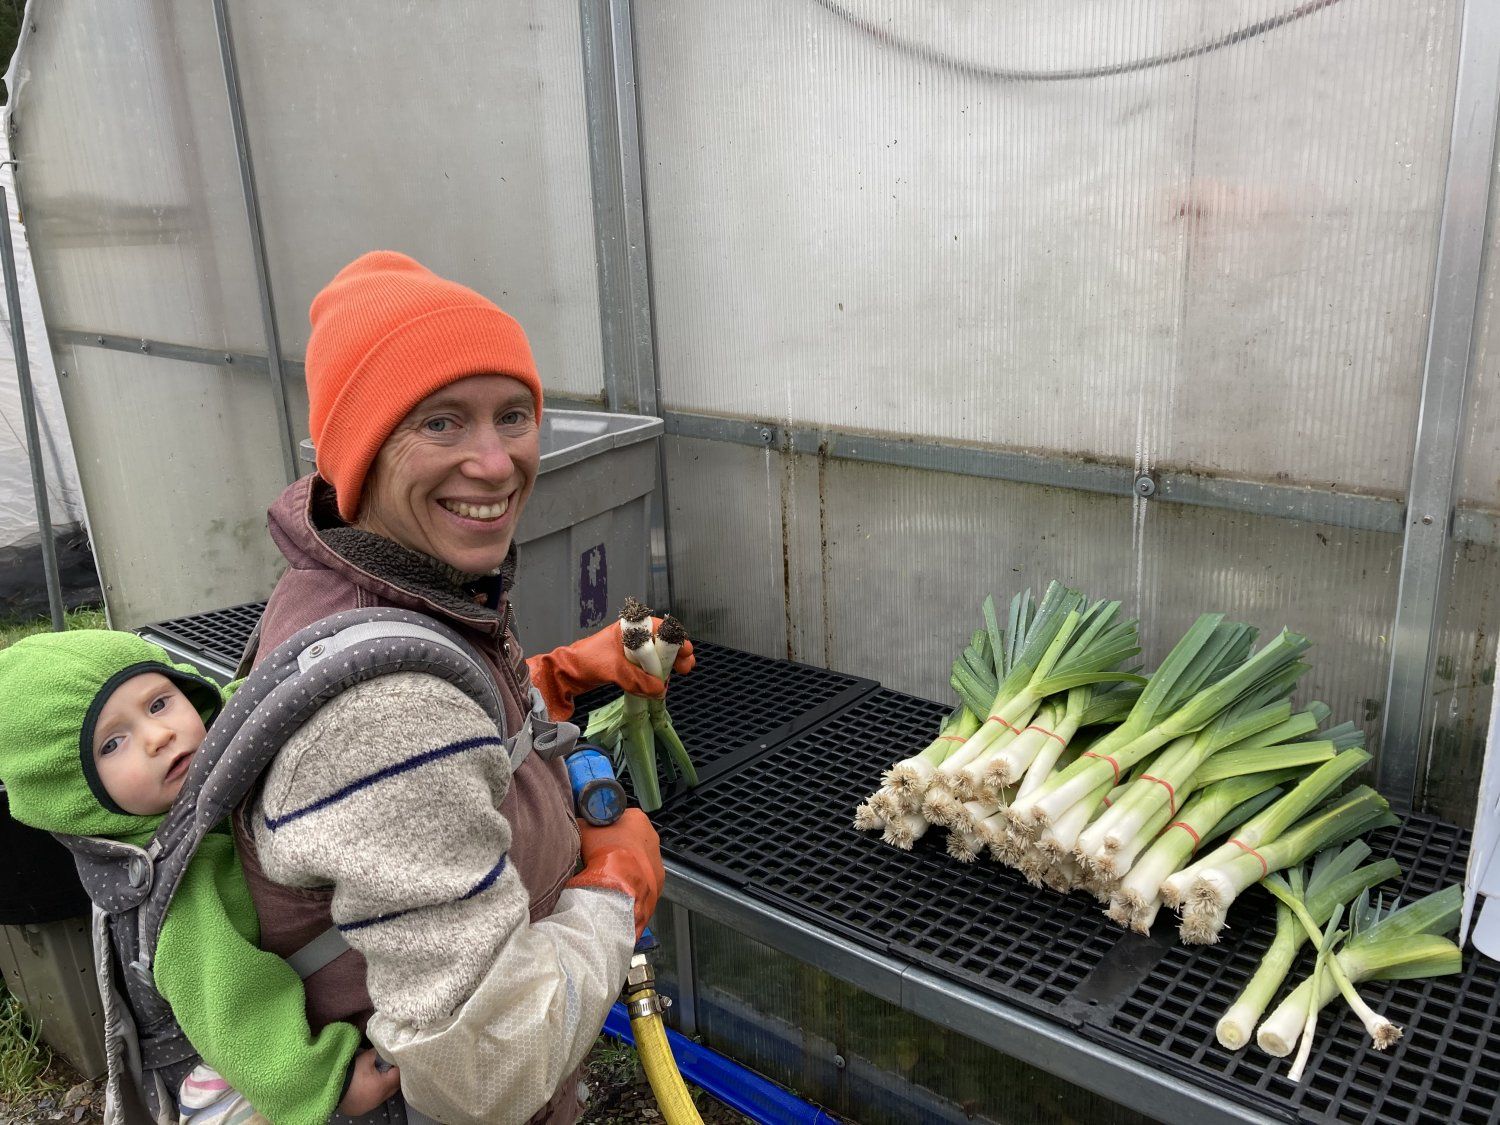 Previous Happening: Don't Know Much About Leeks?